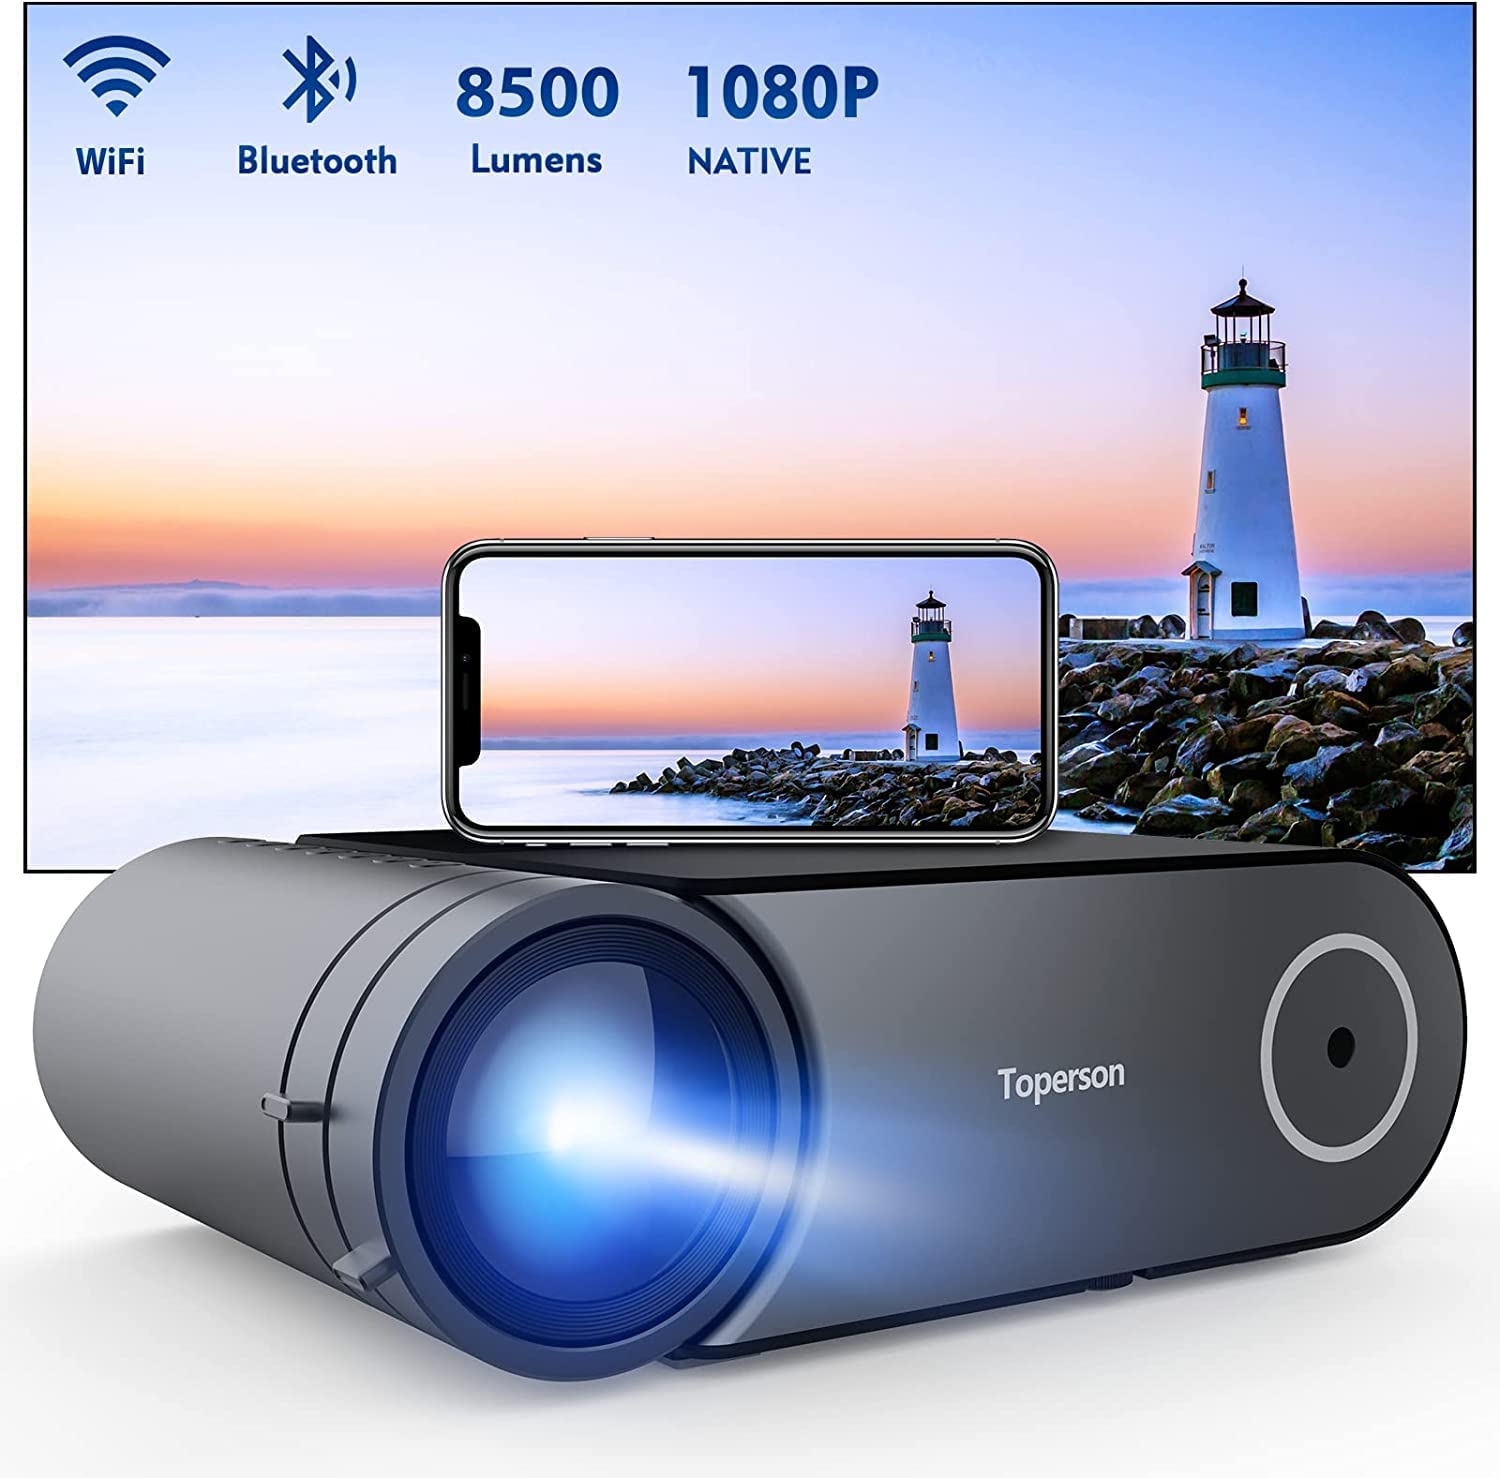 Toperson T421 Review, Pros & Cons - 8500 Lumens WiFi Projector